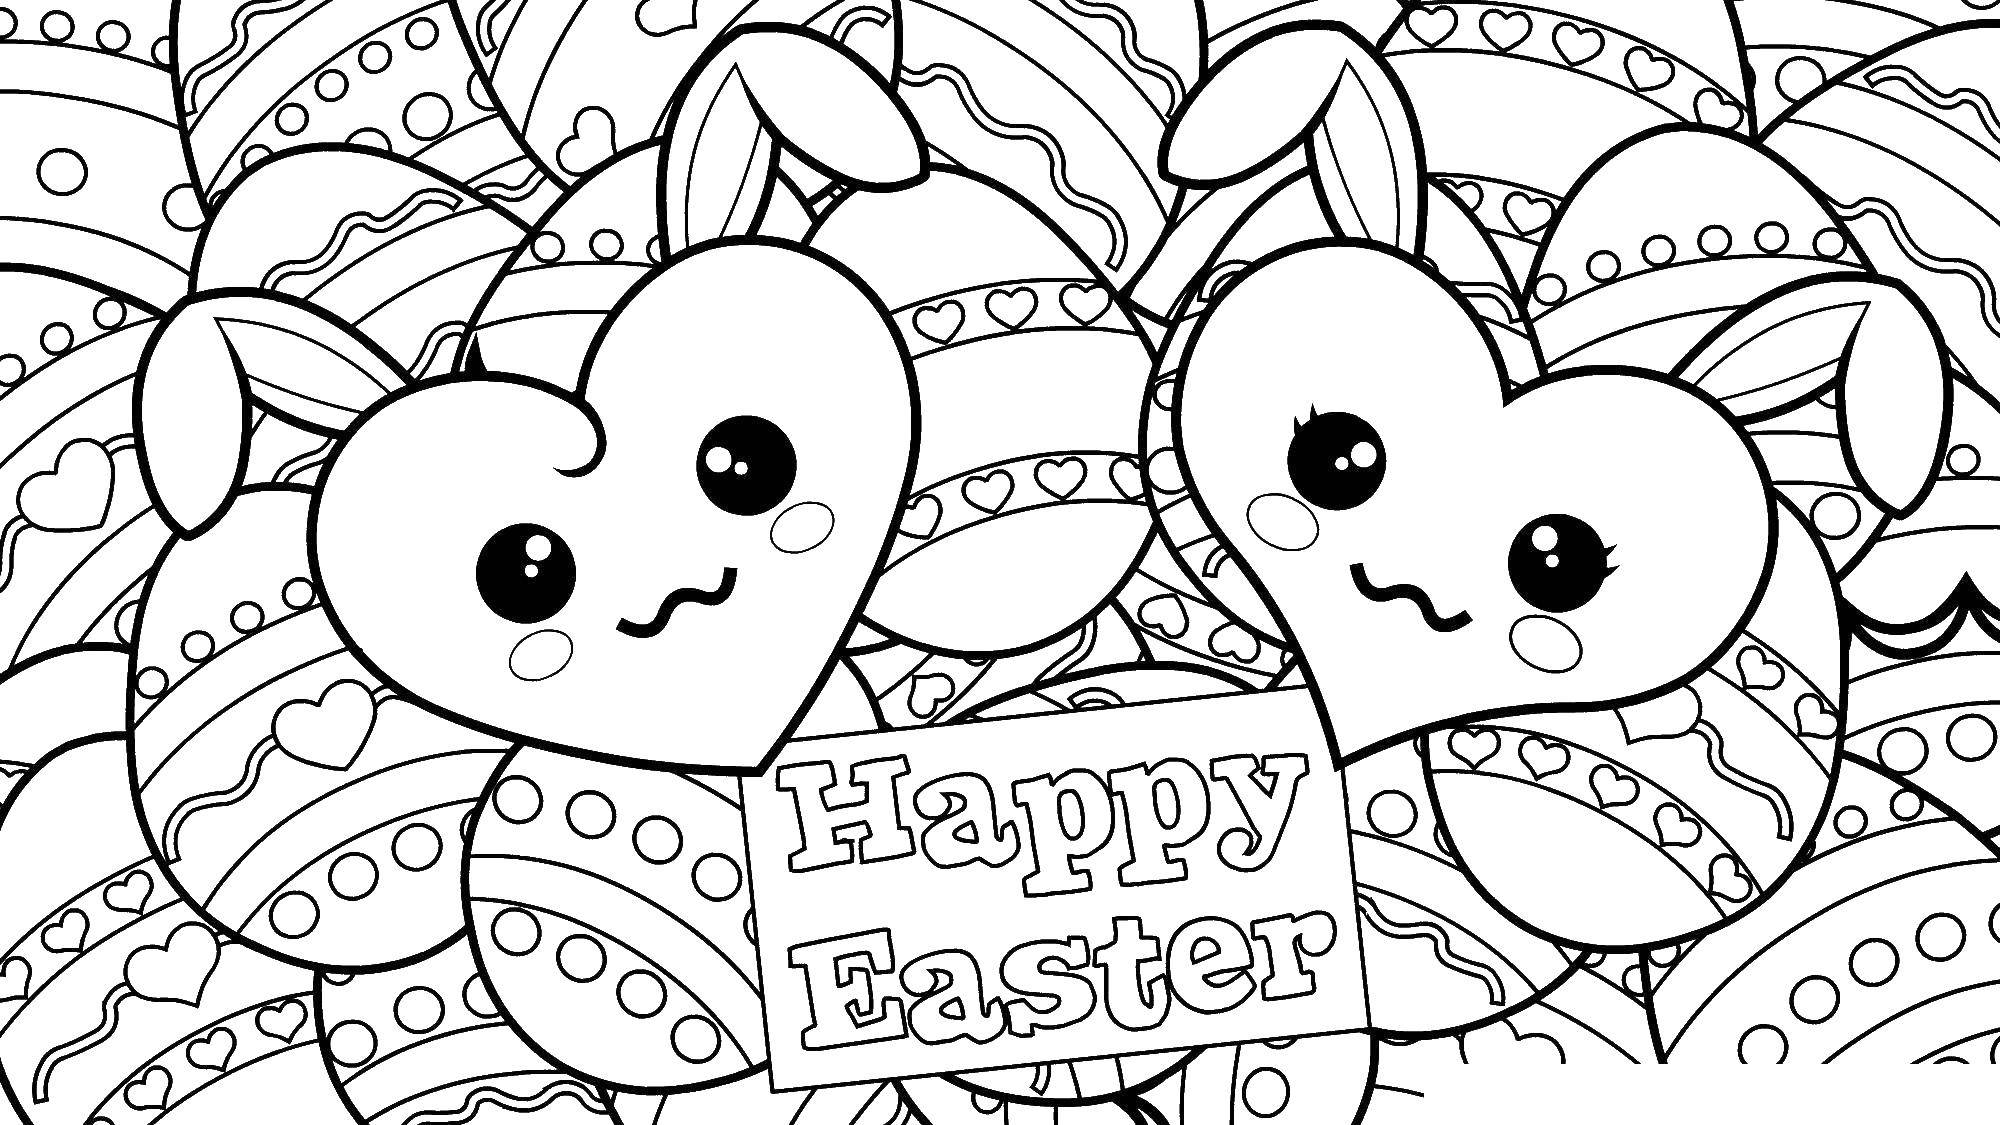 Coloring Greetings for Easter. Category greetings. Tags:  congratulations, Easter.